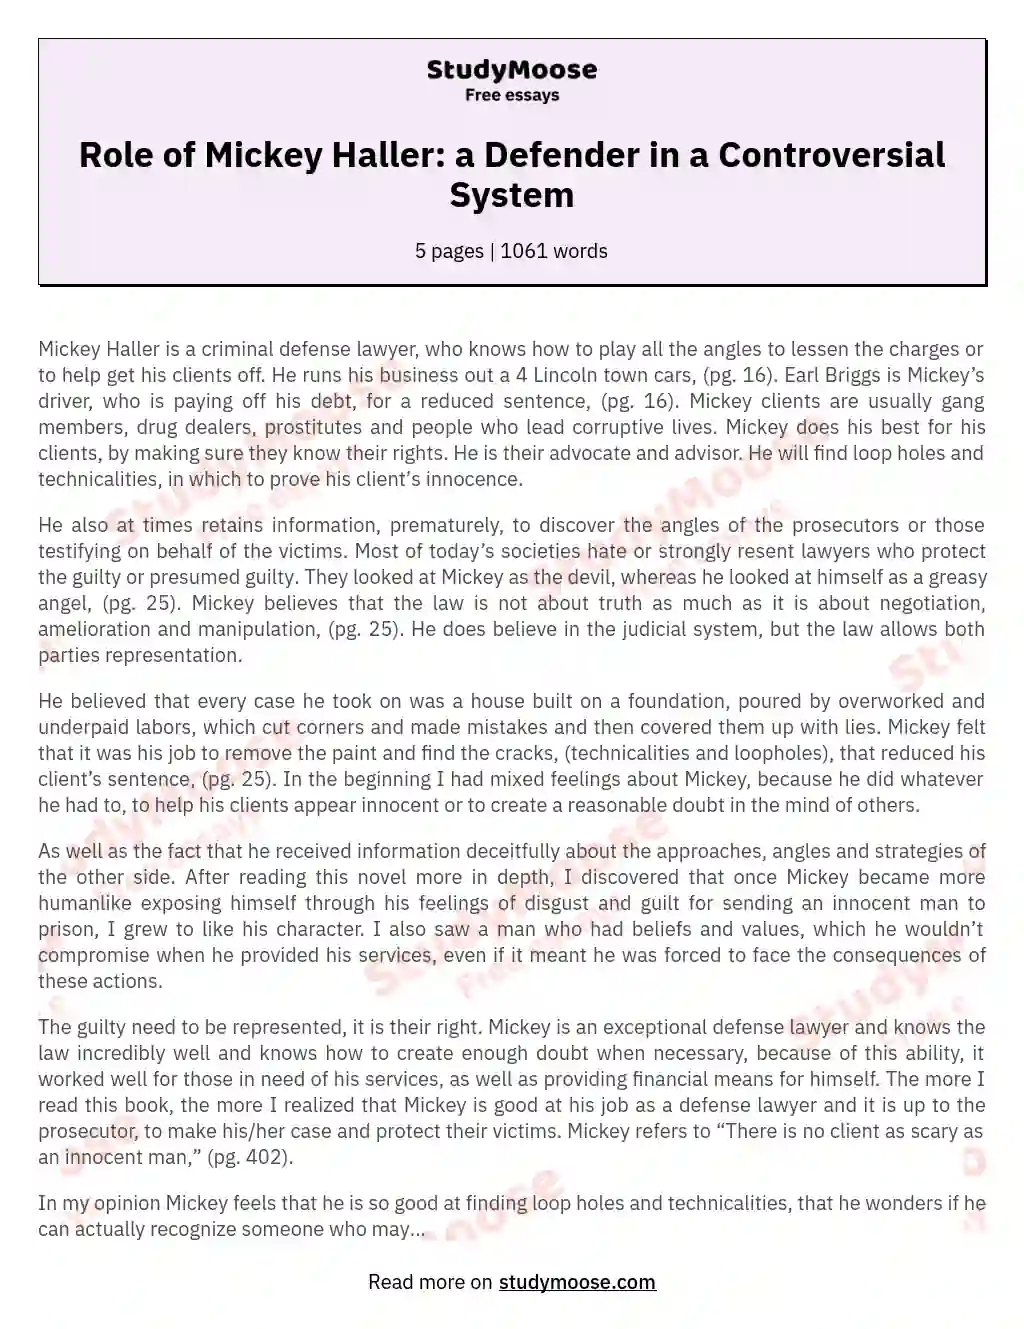 Role of Mickey Haller: a Defender in a Controversial System essay